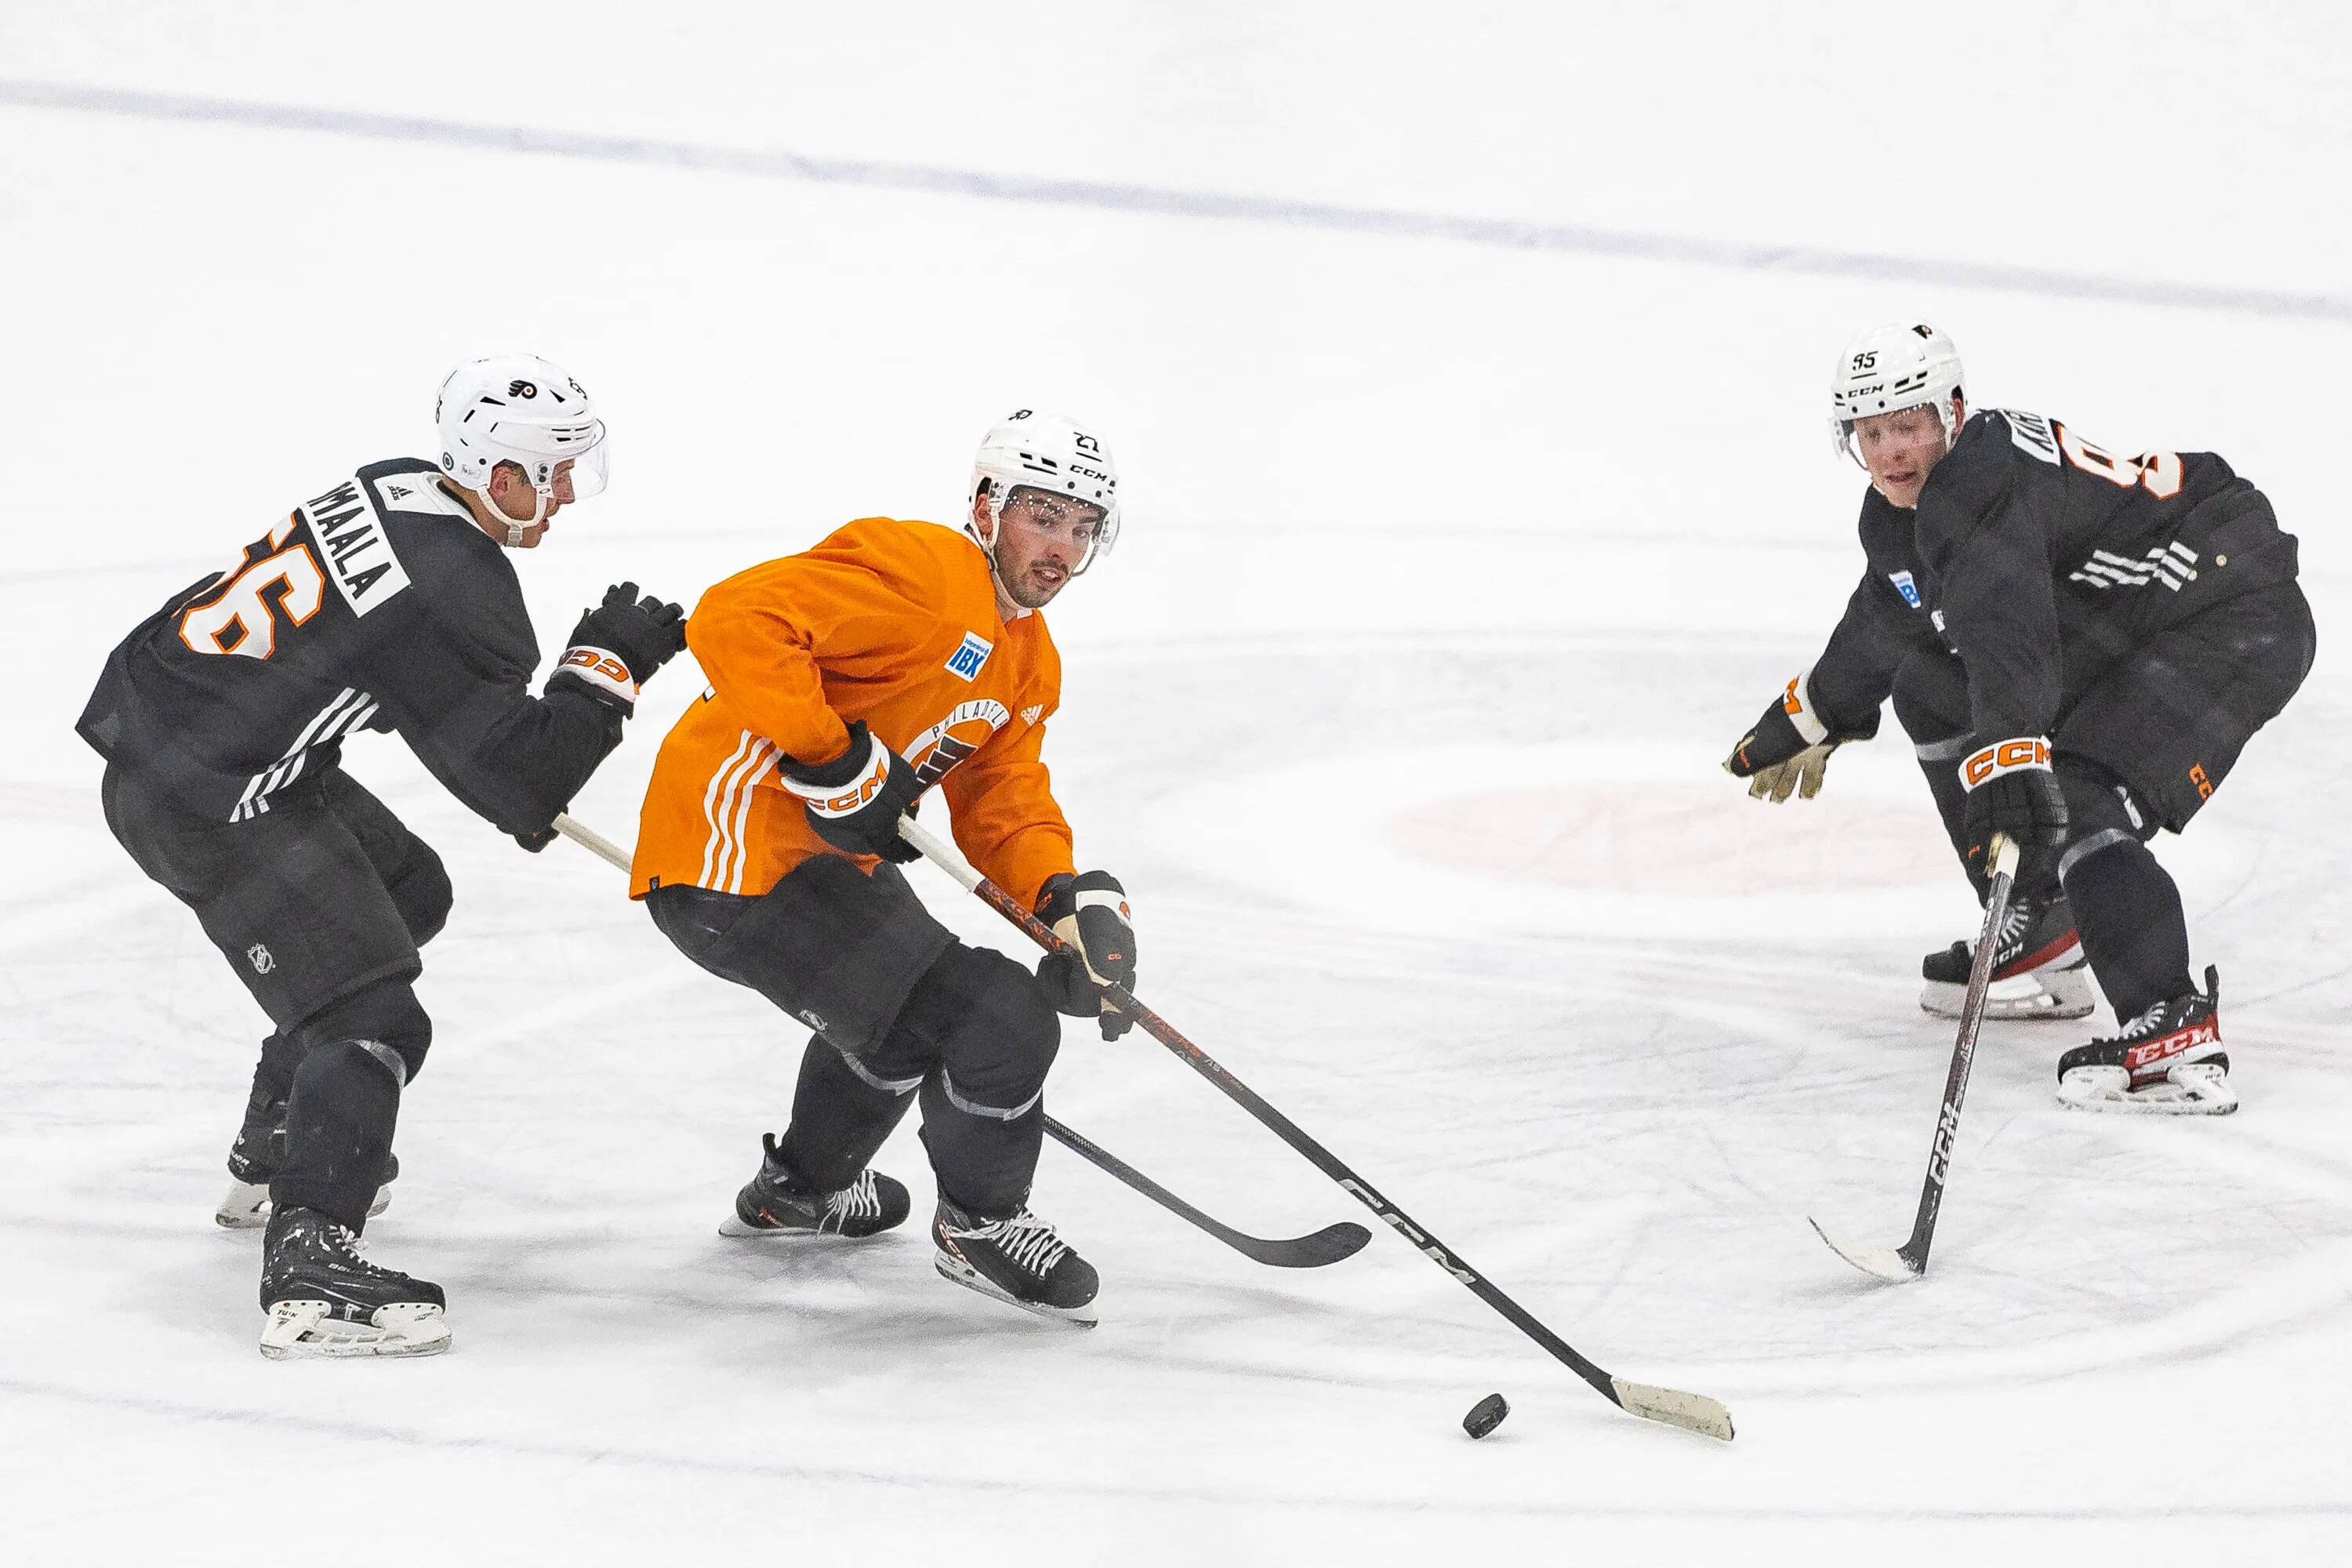 Laughton hopes to follow Couturier footsteps